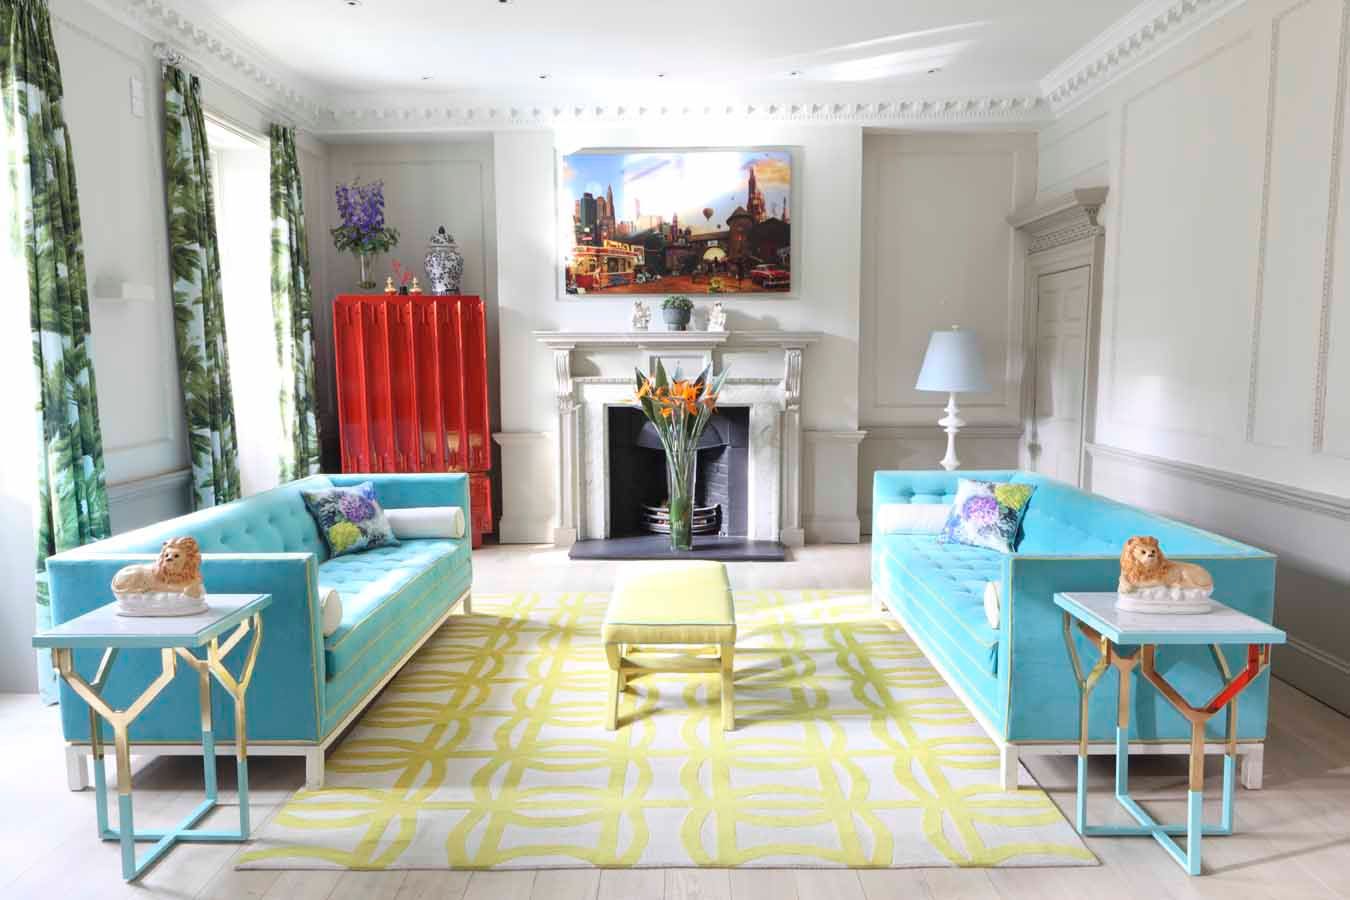 Townhouse drawing room niche pr Living room Copper/Bronze/Brass RebekahCaudwell,London,townhouse,drawing room,colour,turquoise,jonathan adler